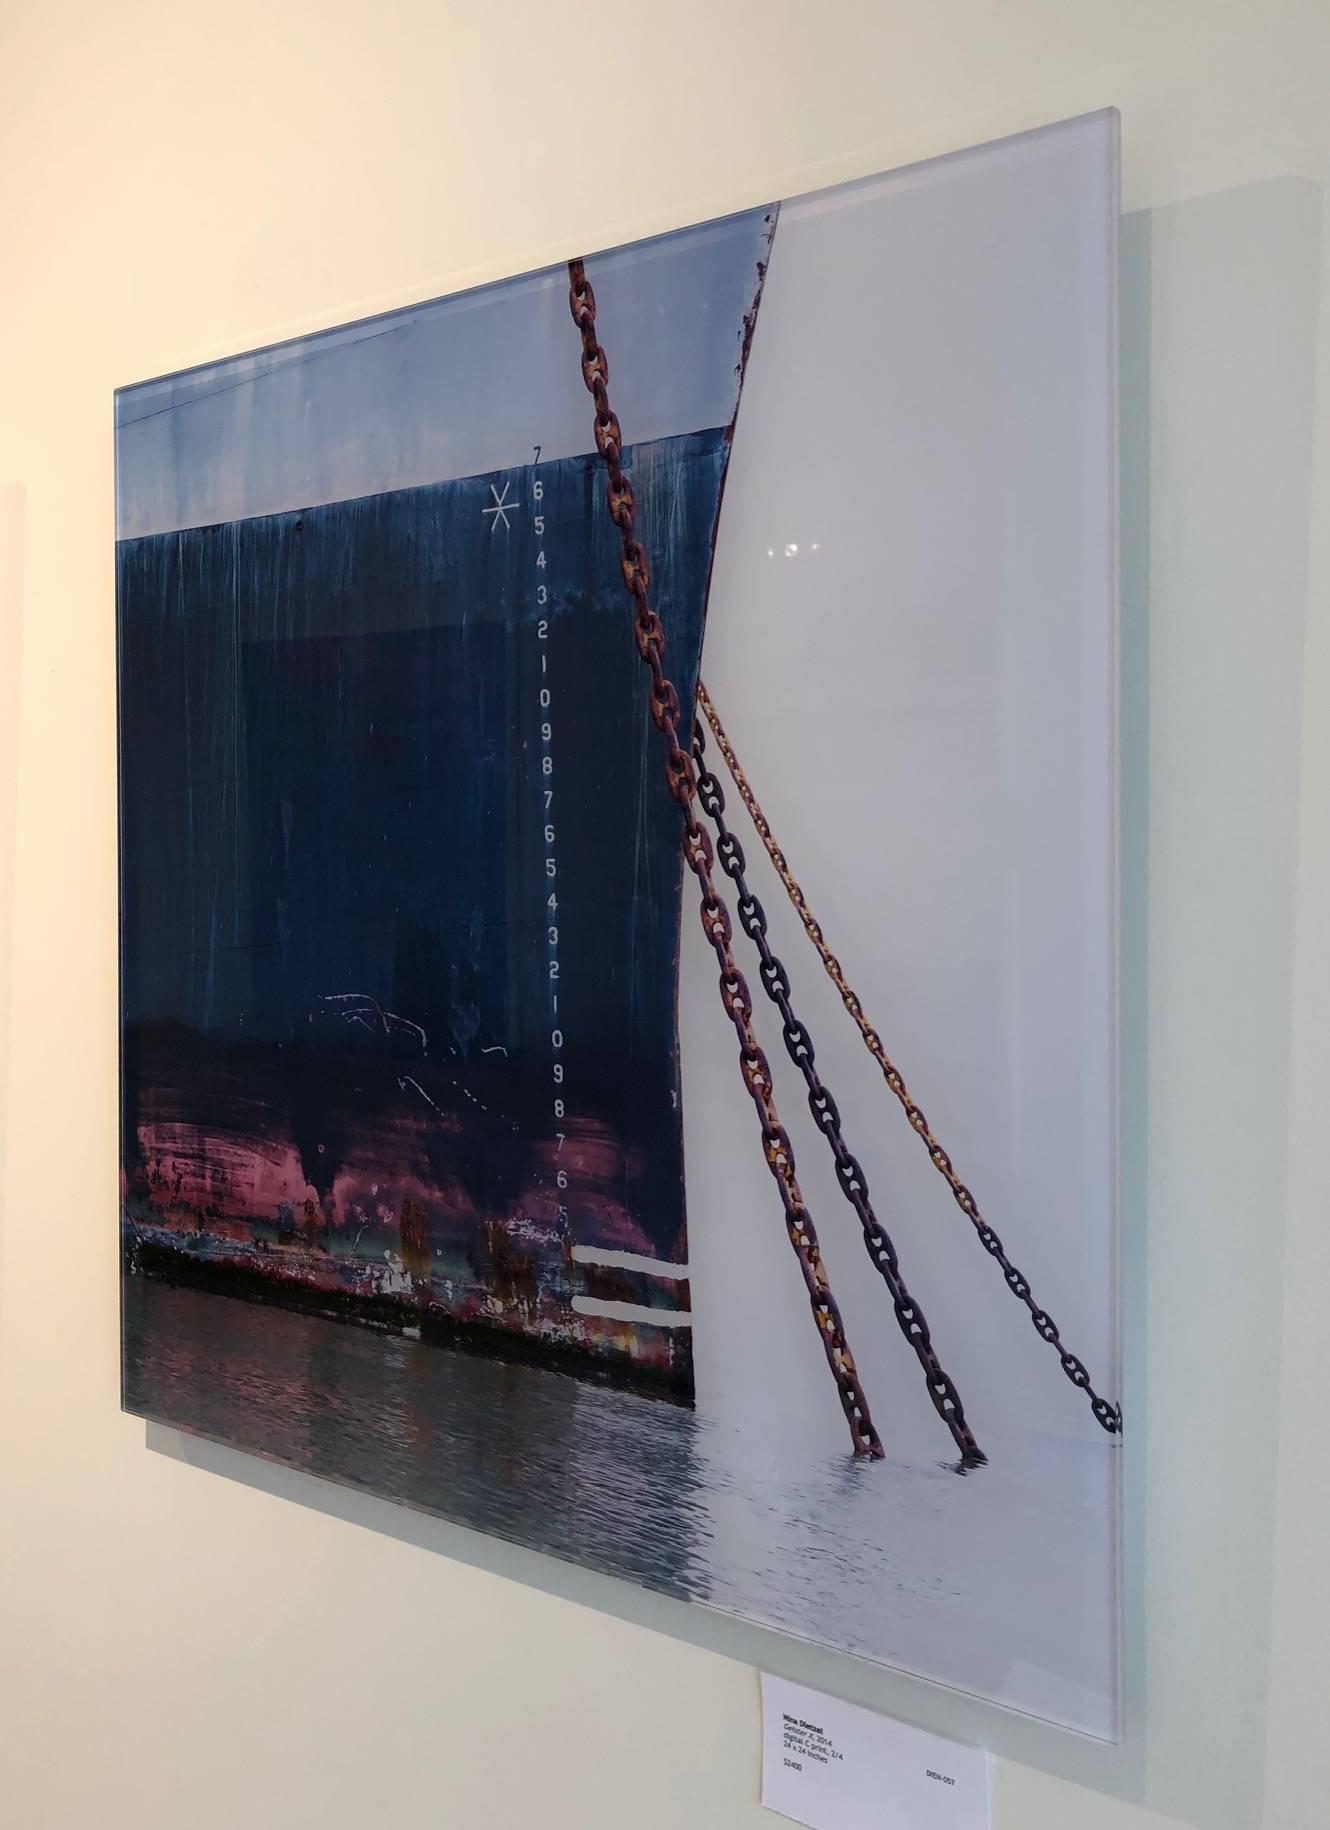 Geister X / ghost ship - contemporary floating photograph  - Photograph by Nina Dietzel